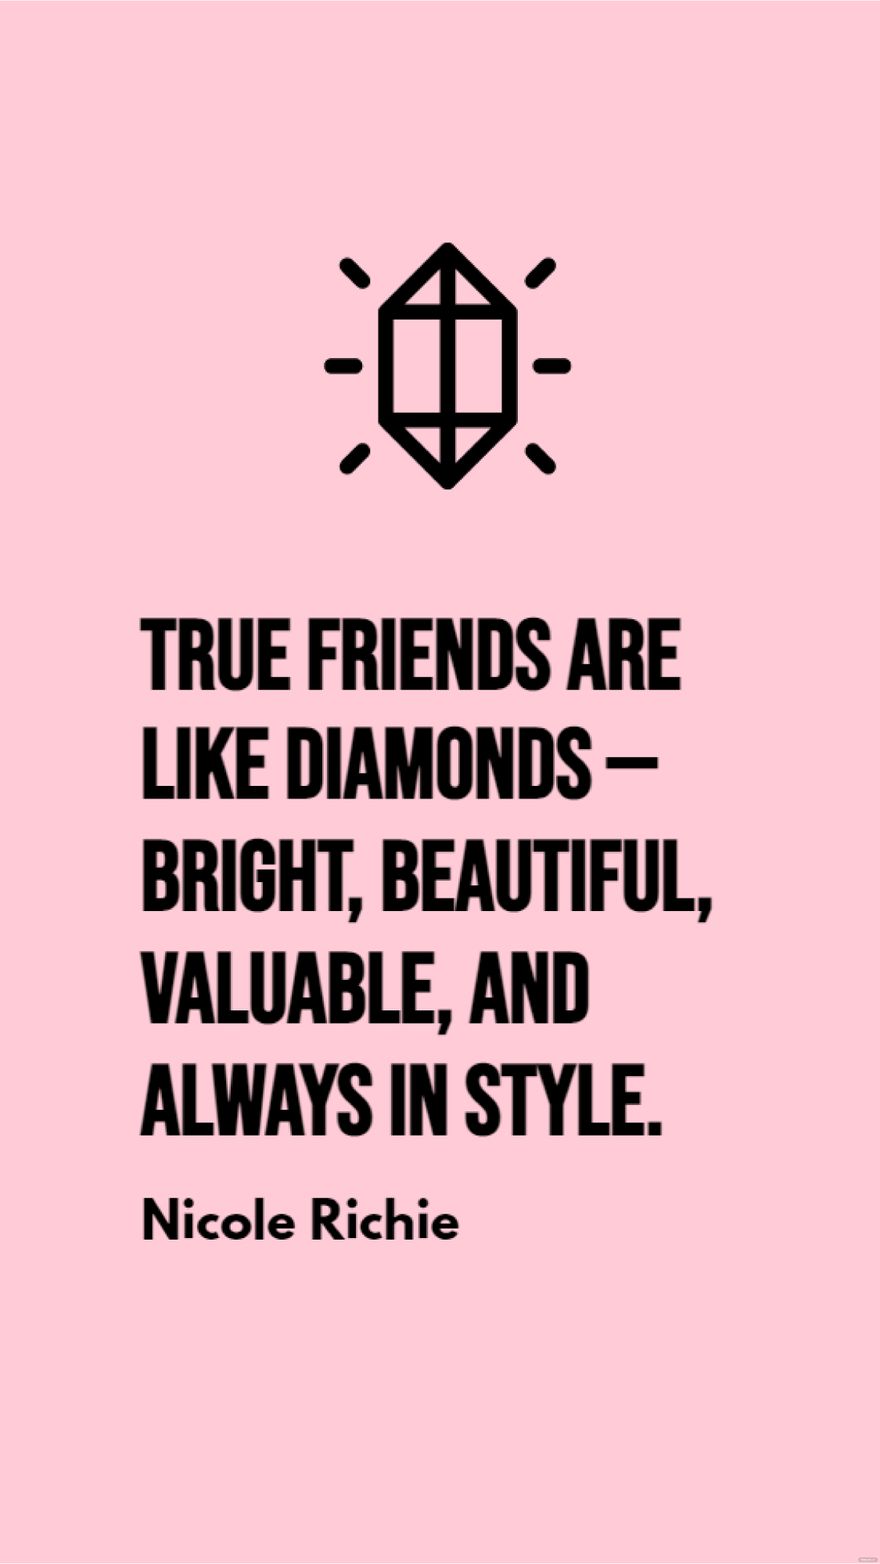 Nicole Richie - True friends are like diamonds — bright, beautiful, valuable, and always in style.